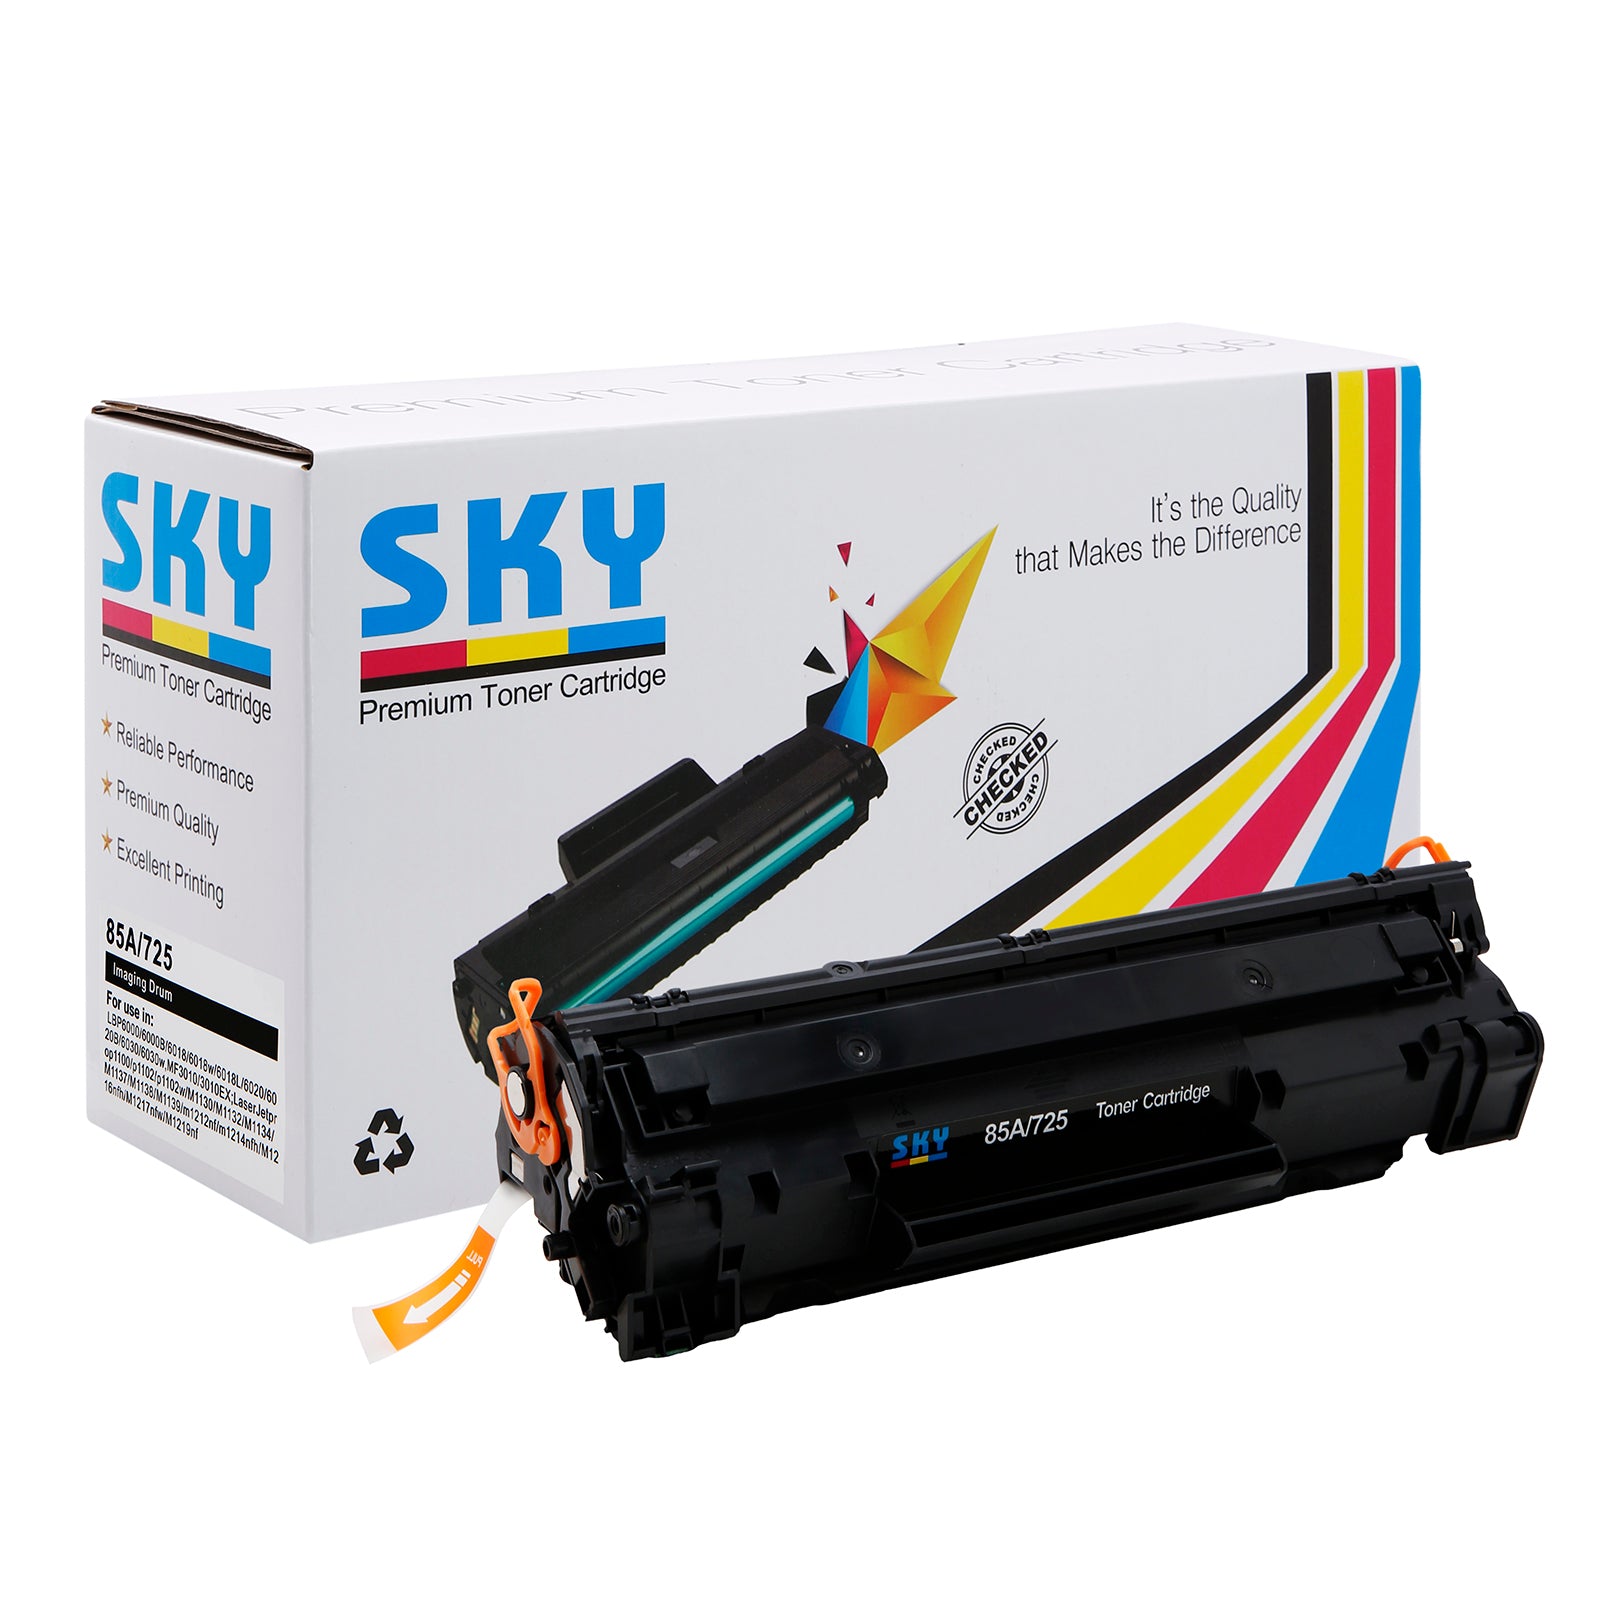 725 Toner Cartridge for Canon i-SENSYS LBP6030 Printers 1500pages